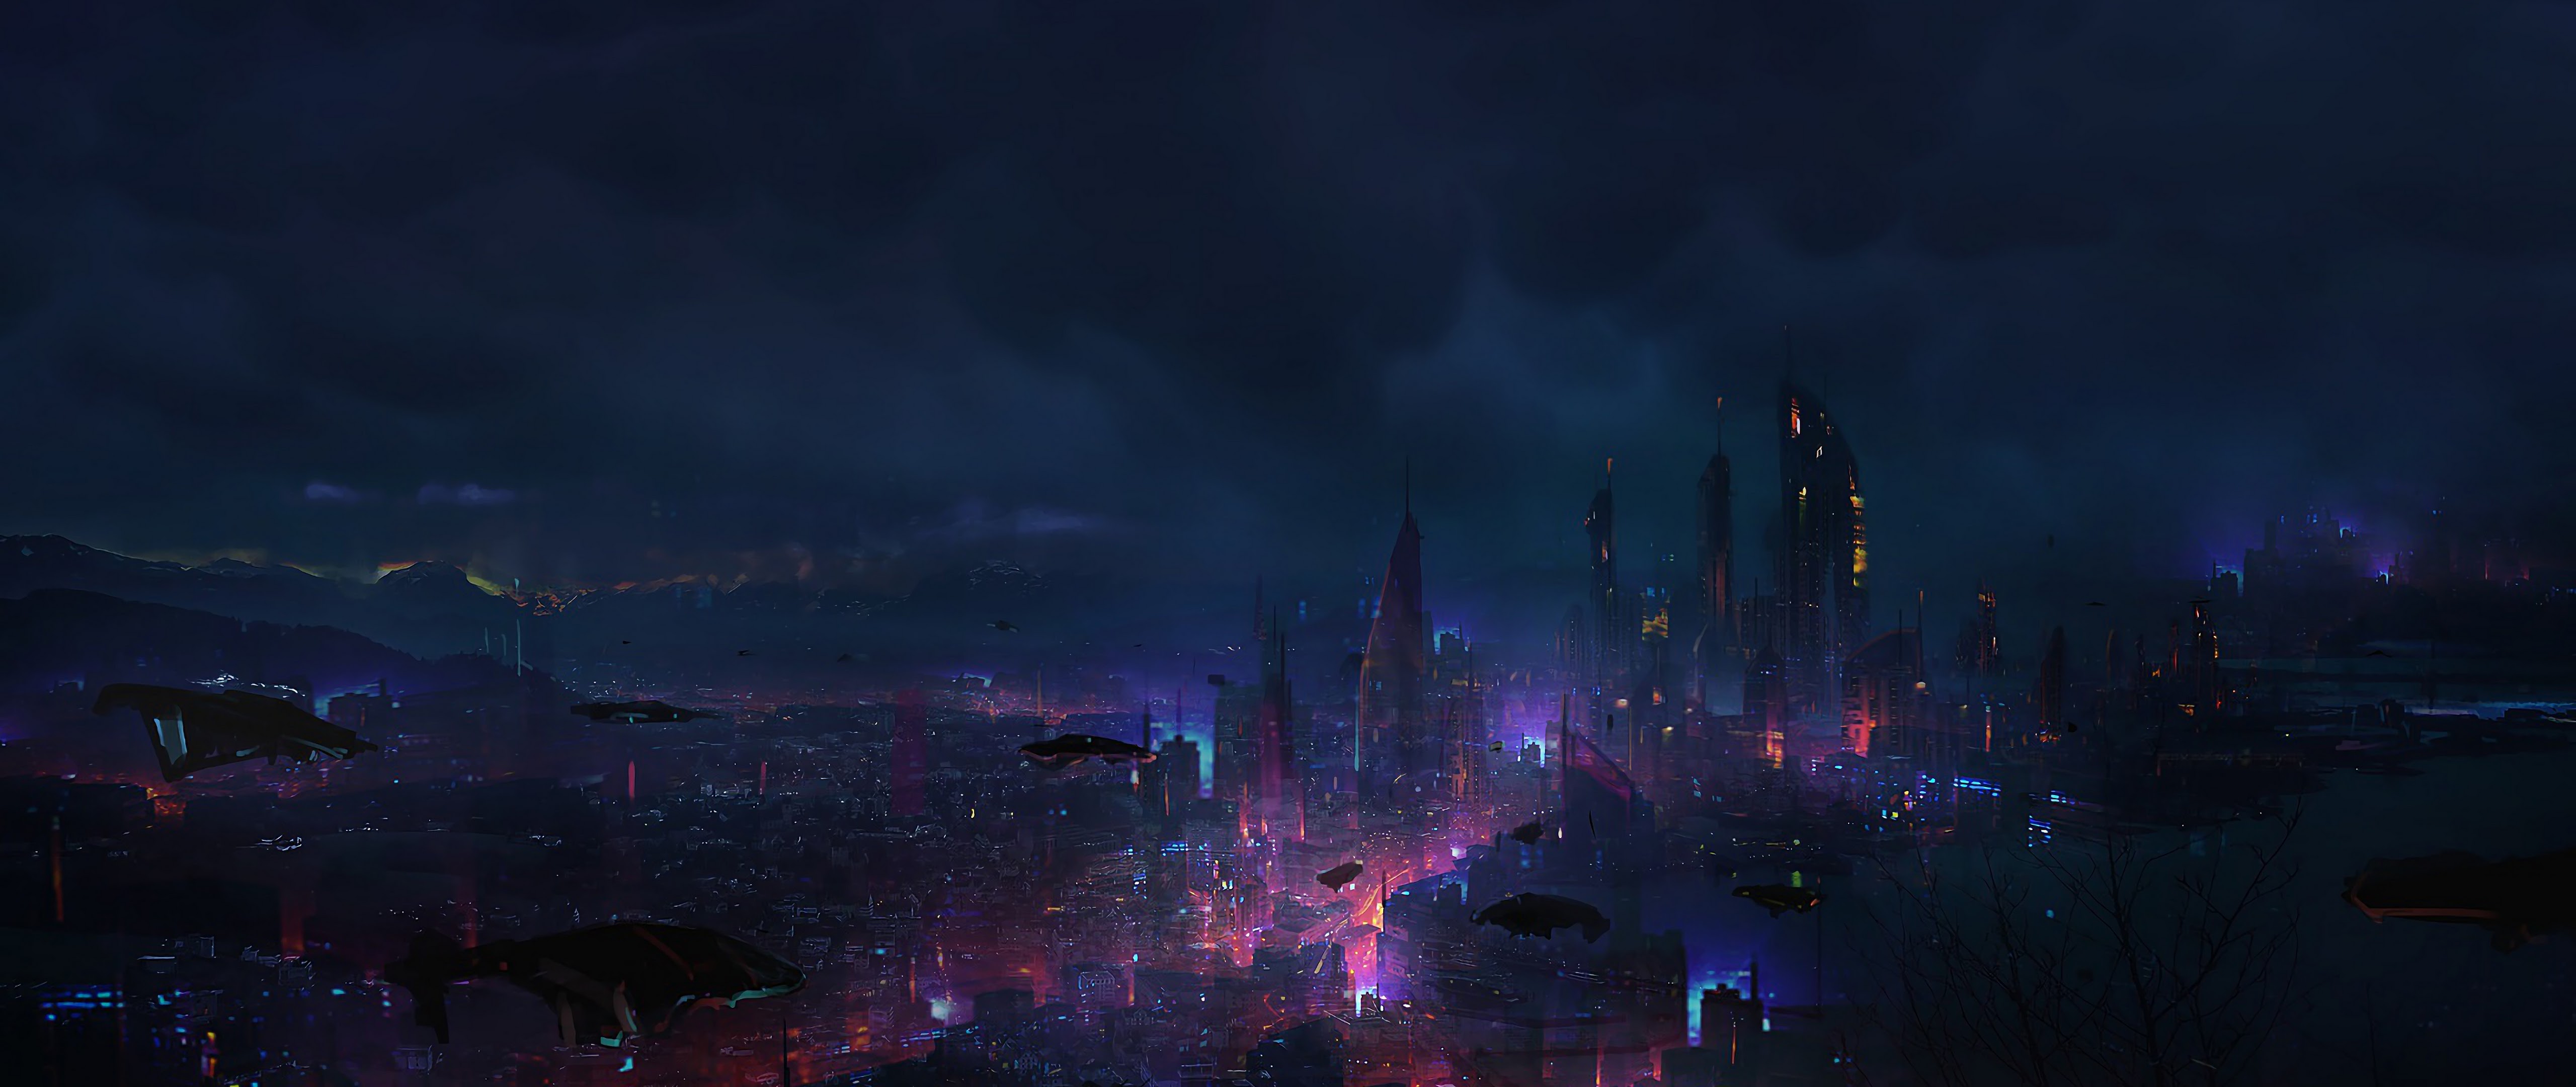 160 4K Sci Fi Cyberpunk Wallpapers  Background Images